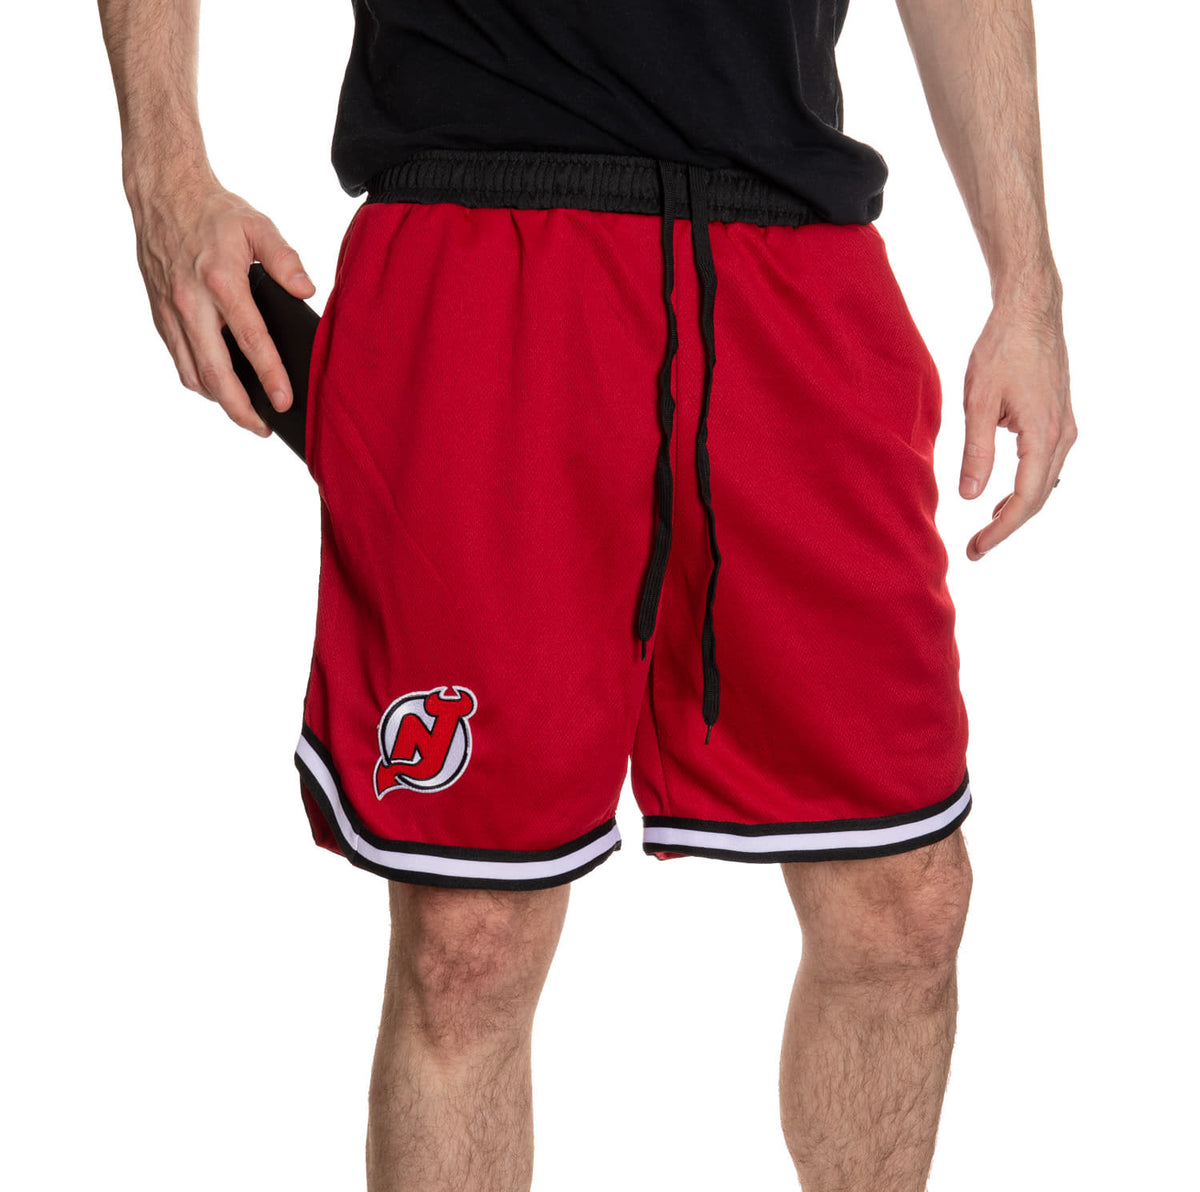 New Jersey Devils Men's 2 Tone Air Mesh Shorts Lined with Pockets